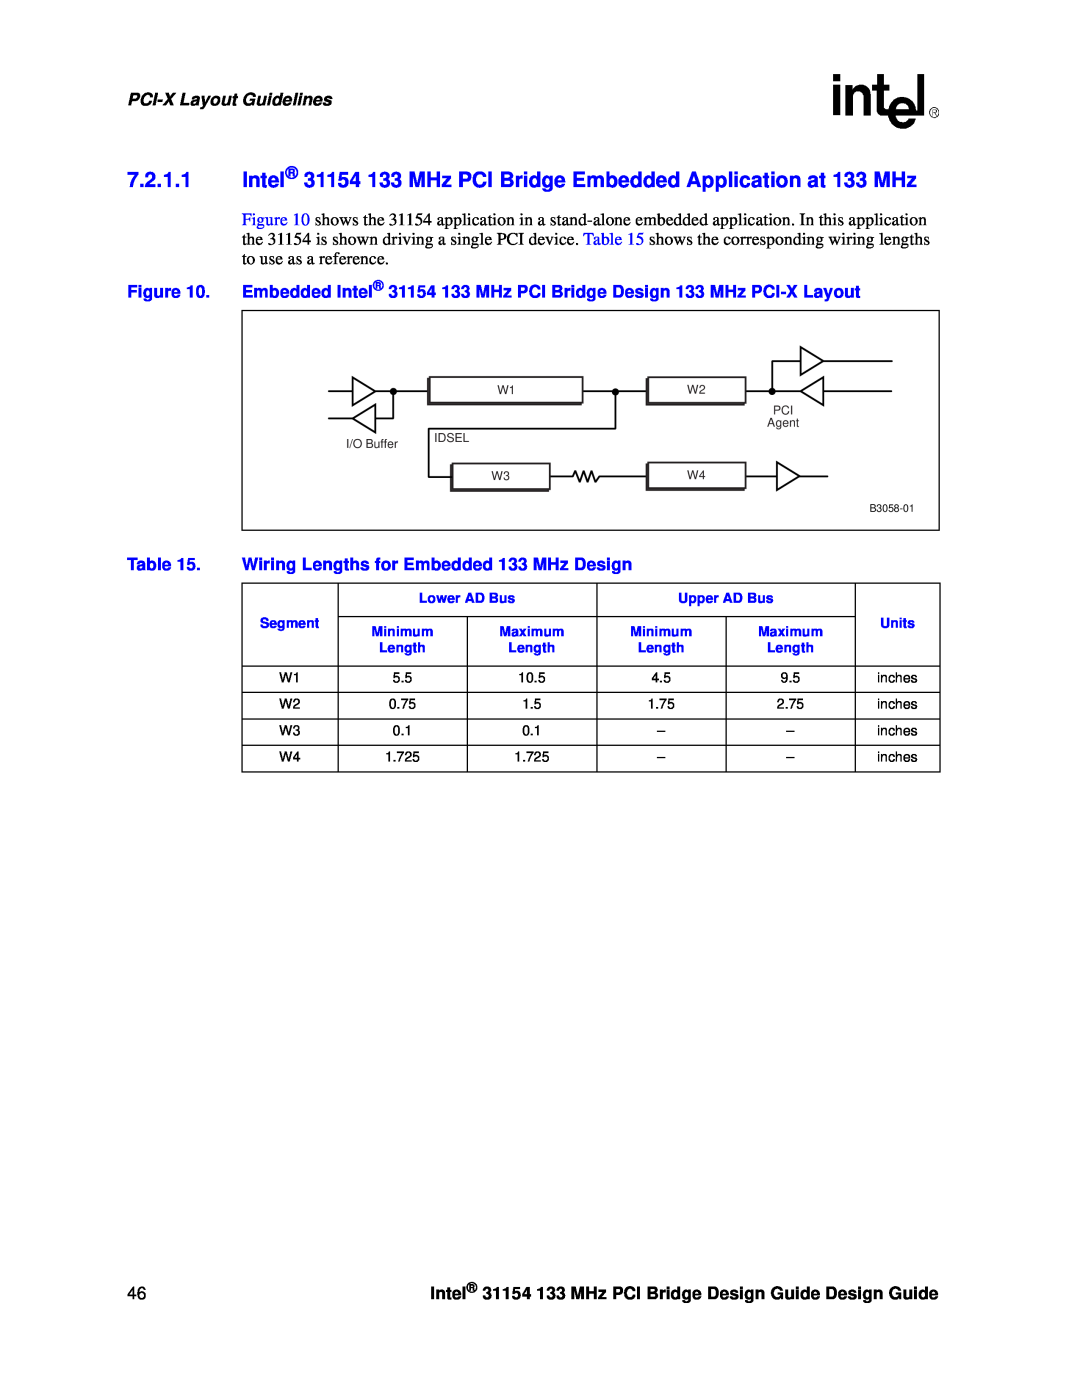 Intel 31154 manual Wiring Lengths for Embedded 133 MHz Design, PCI-X Layout Guidelines, B3058-01 